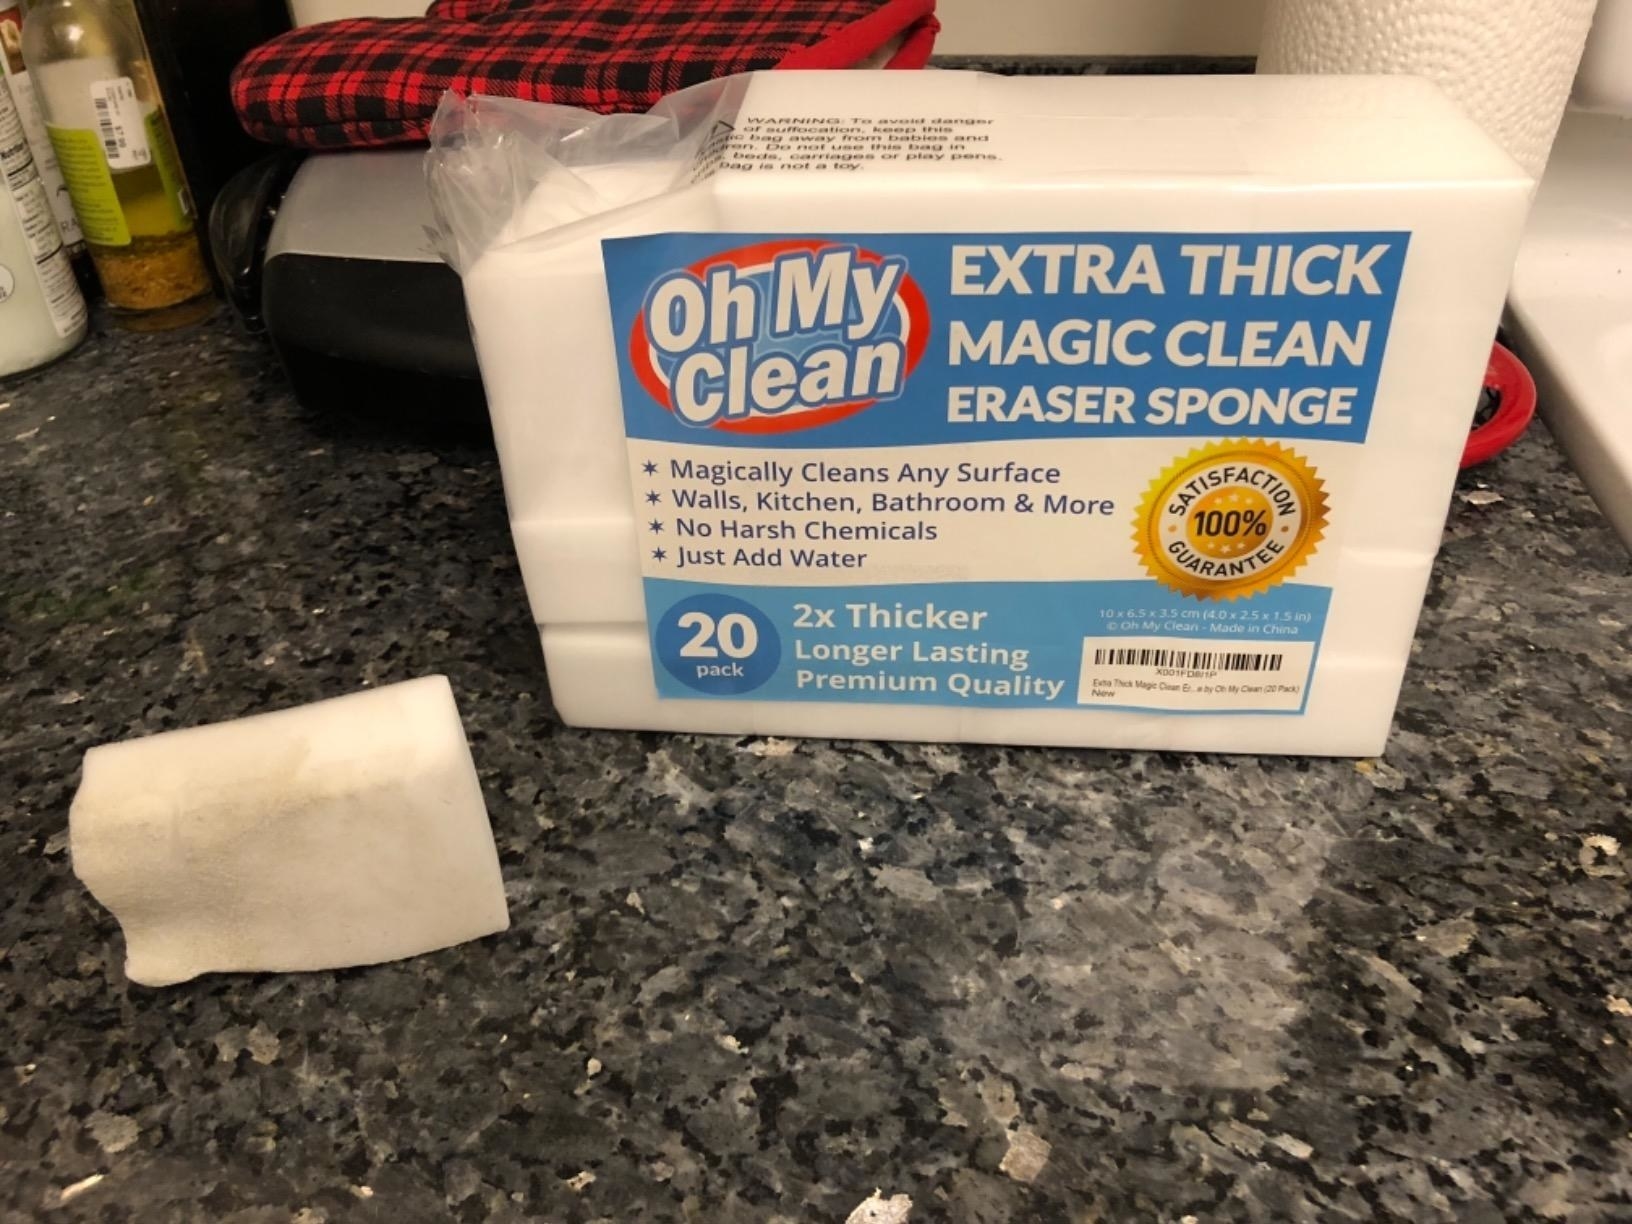 Reviewer photo of used cleaning sponge next to pack of 20